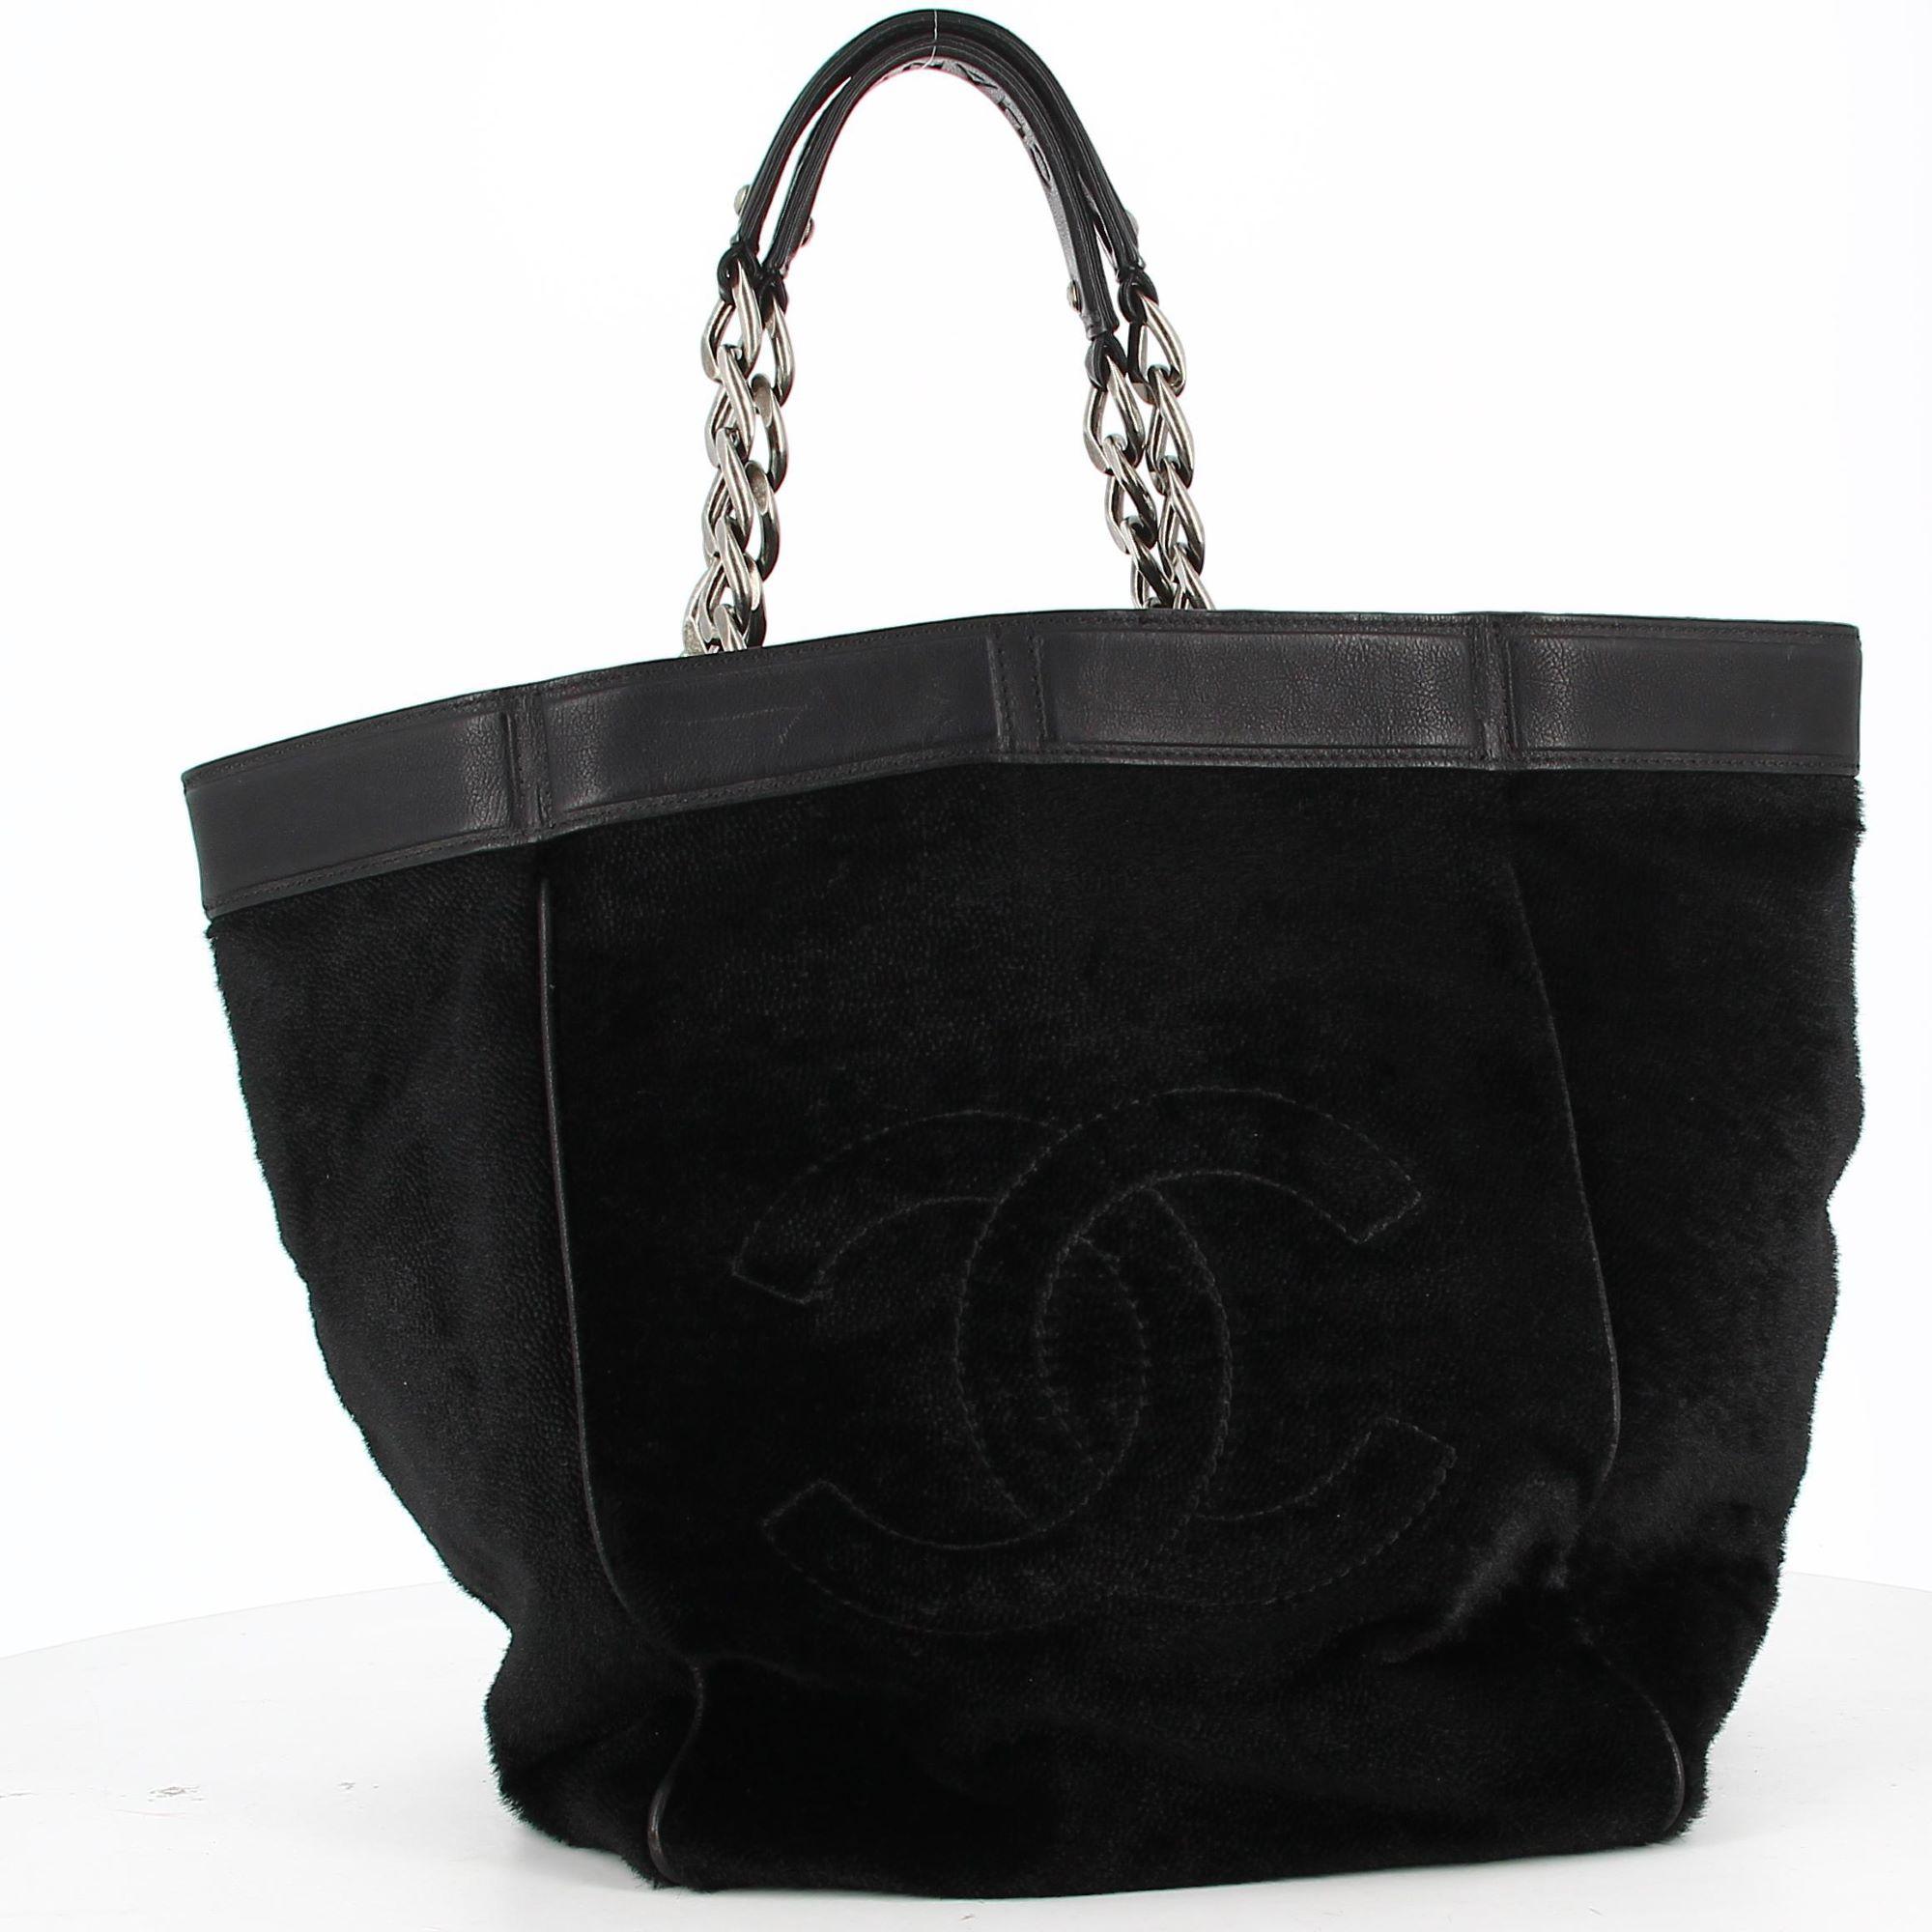 Chanel Large Black Logo Tote bag.
Very good condition, show some light signs of use and wear but nothing visible. A beautiful piece to add in your closet !
Chanel cabas with two chain as handstrap and a double C on both side !
Reversed calfskin